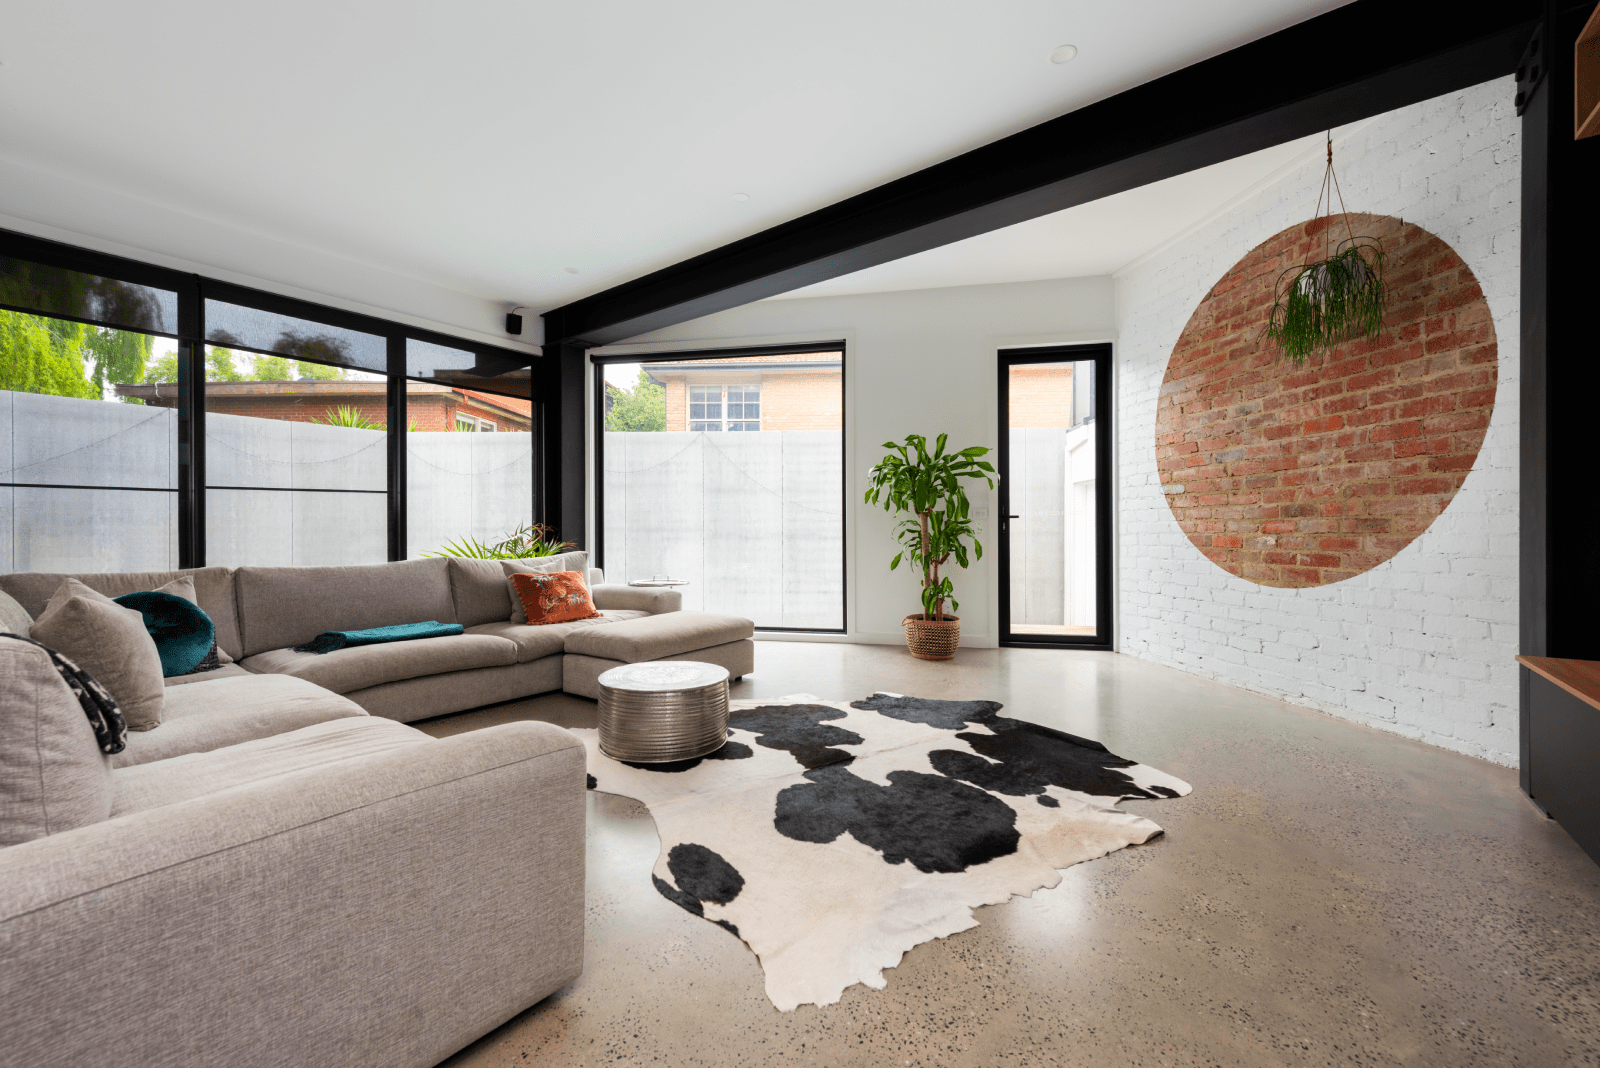 Once complete, polished concrete looks stunning